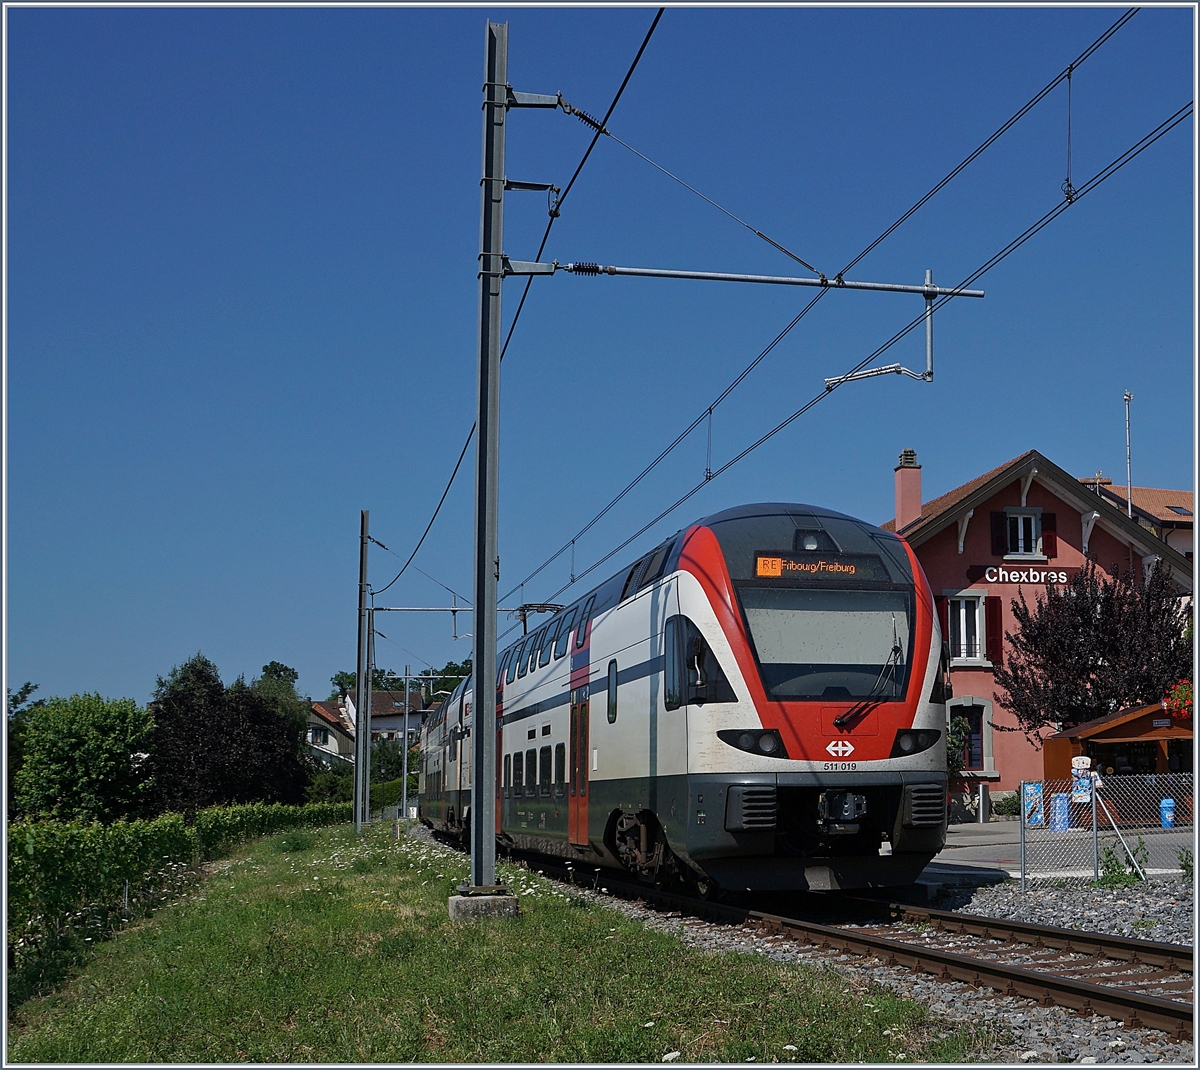 The SBB RABe 511 019 is on the way as RE Genève - Vevey - Fribourg in Chexbres. (Special Summer SBB Timetable).
10.07.2018  